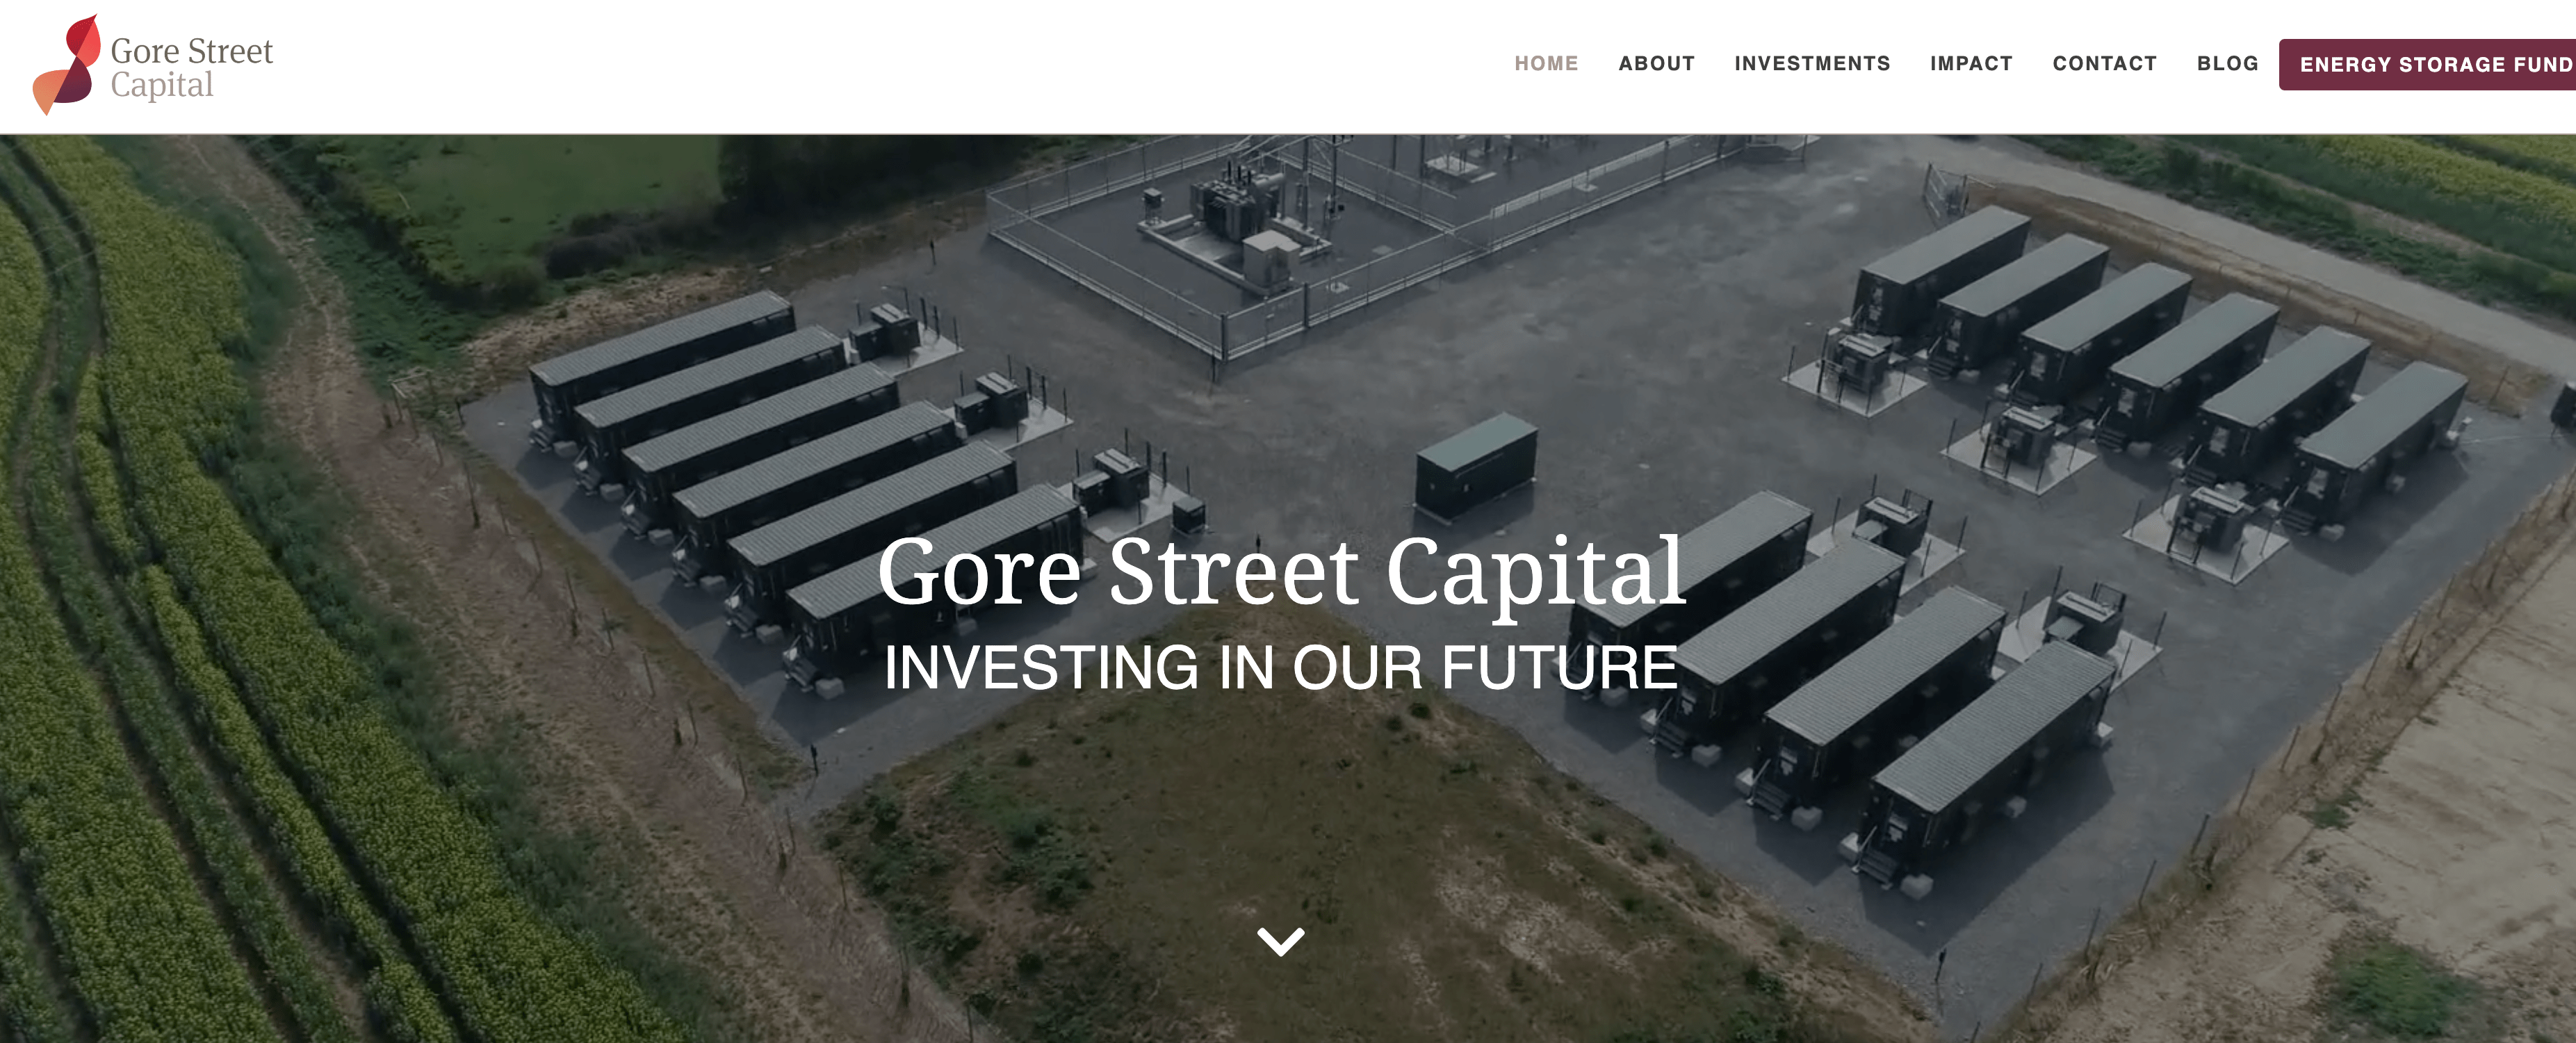 Gore Street Capital: An Investment Strategy for the Low-Carbon Economy